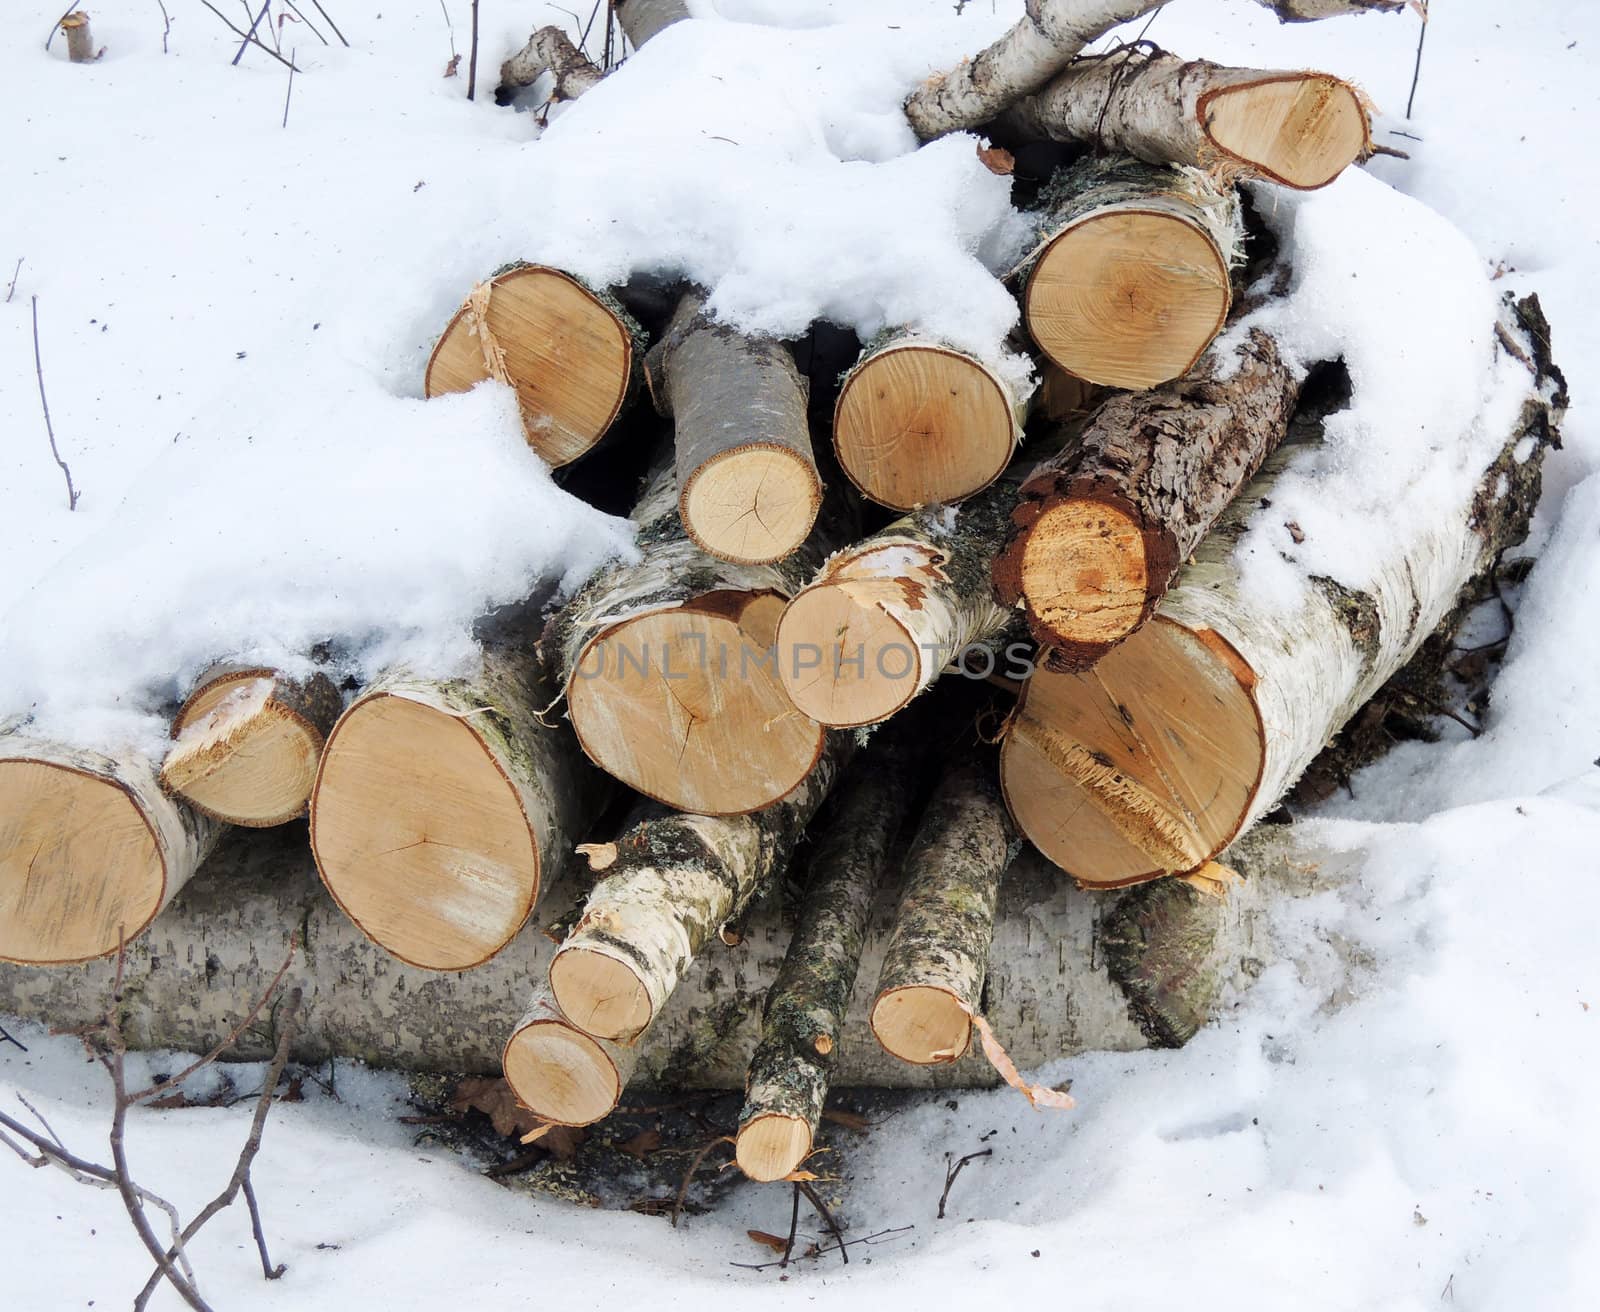 Wood pile with snow in forest